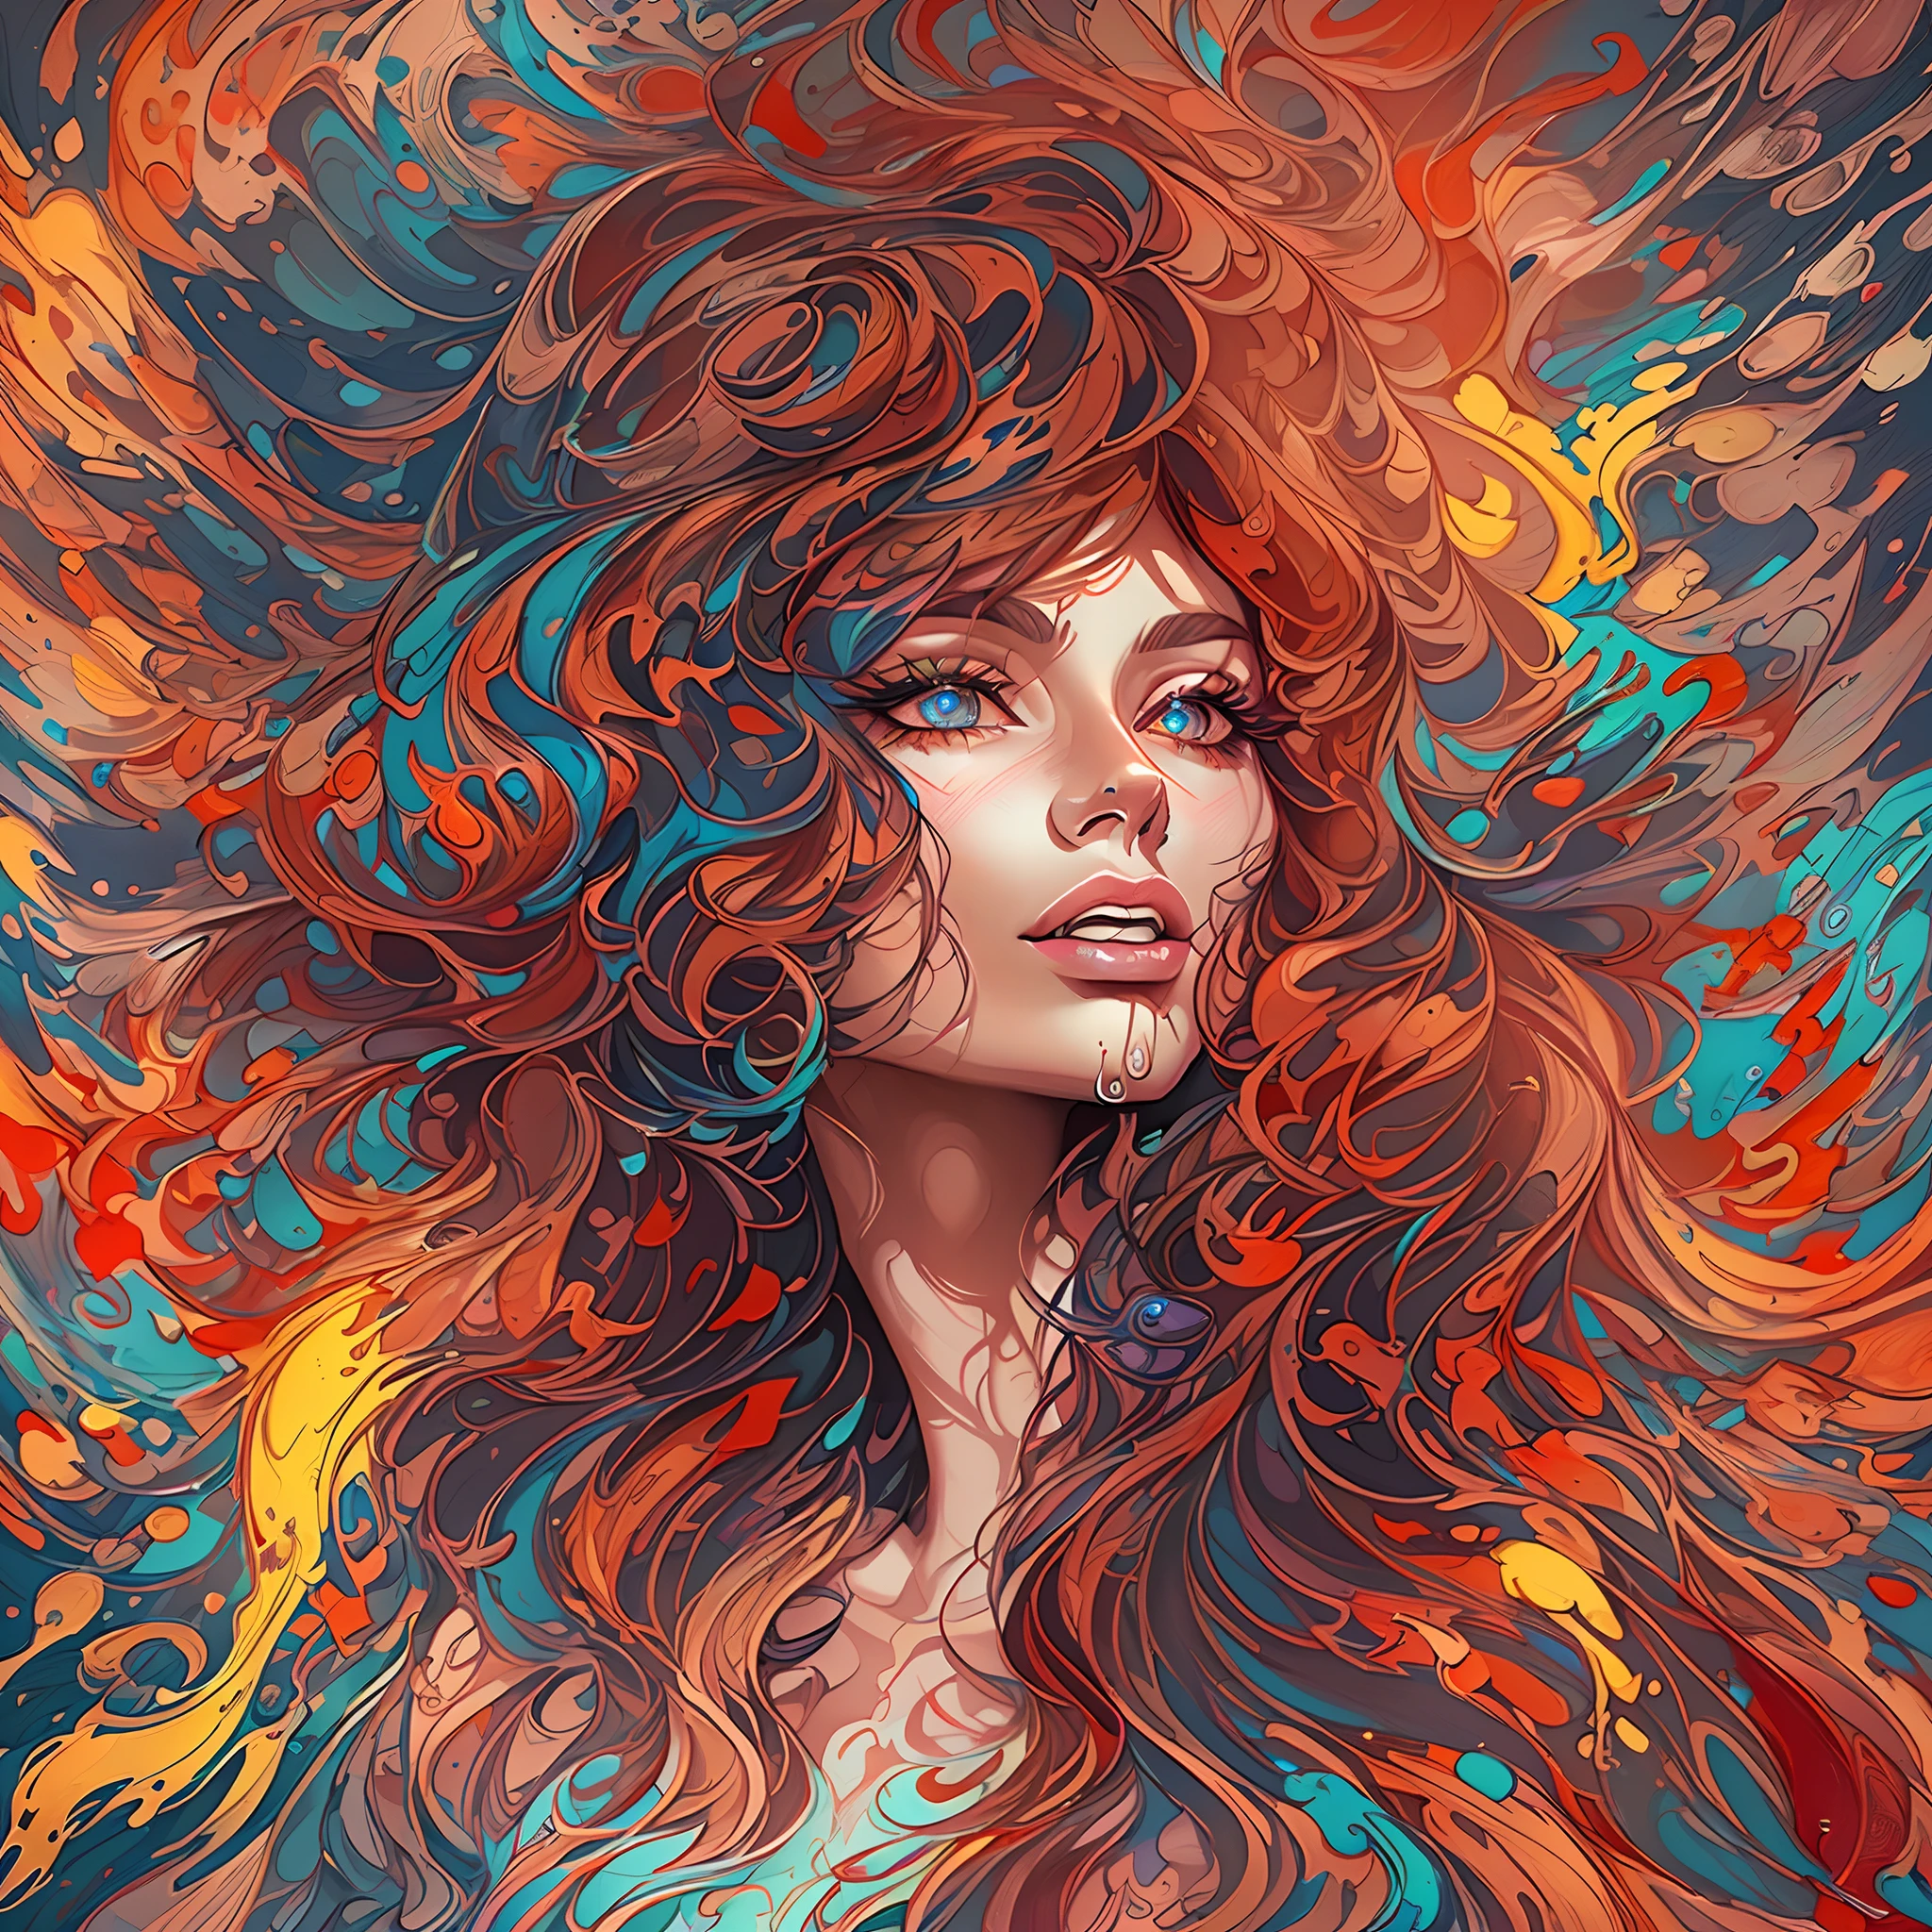 A painting of a woman mixture of (J Lo Jenefer lopezs + Sophia Loren) ( with colorful hair and a face, Colorful Art, Art, Intricate Digital Painting, Colorful Artwork, Colorful Illustration, dripping with color, colorful digital art, Colorful Illustration, Beautiful 4K UHD Art, Vibrant Digital Painting , Stunning digital illustration, Intricate colorful masterpiece, A beautiful artwork illustration, Beautiful color art!